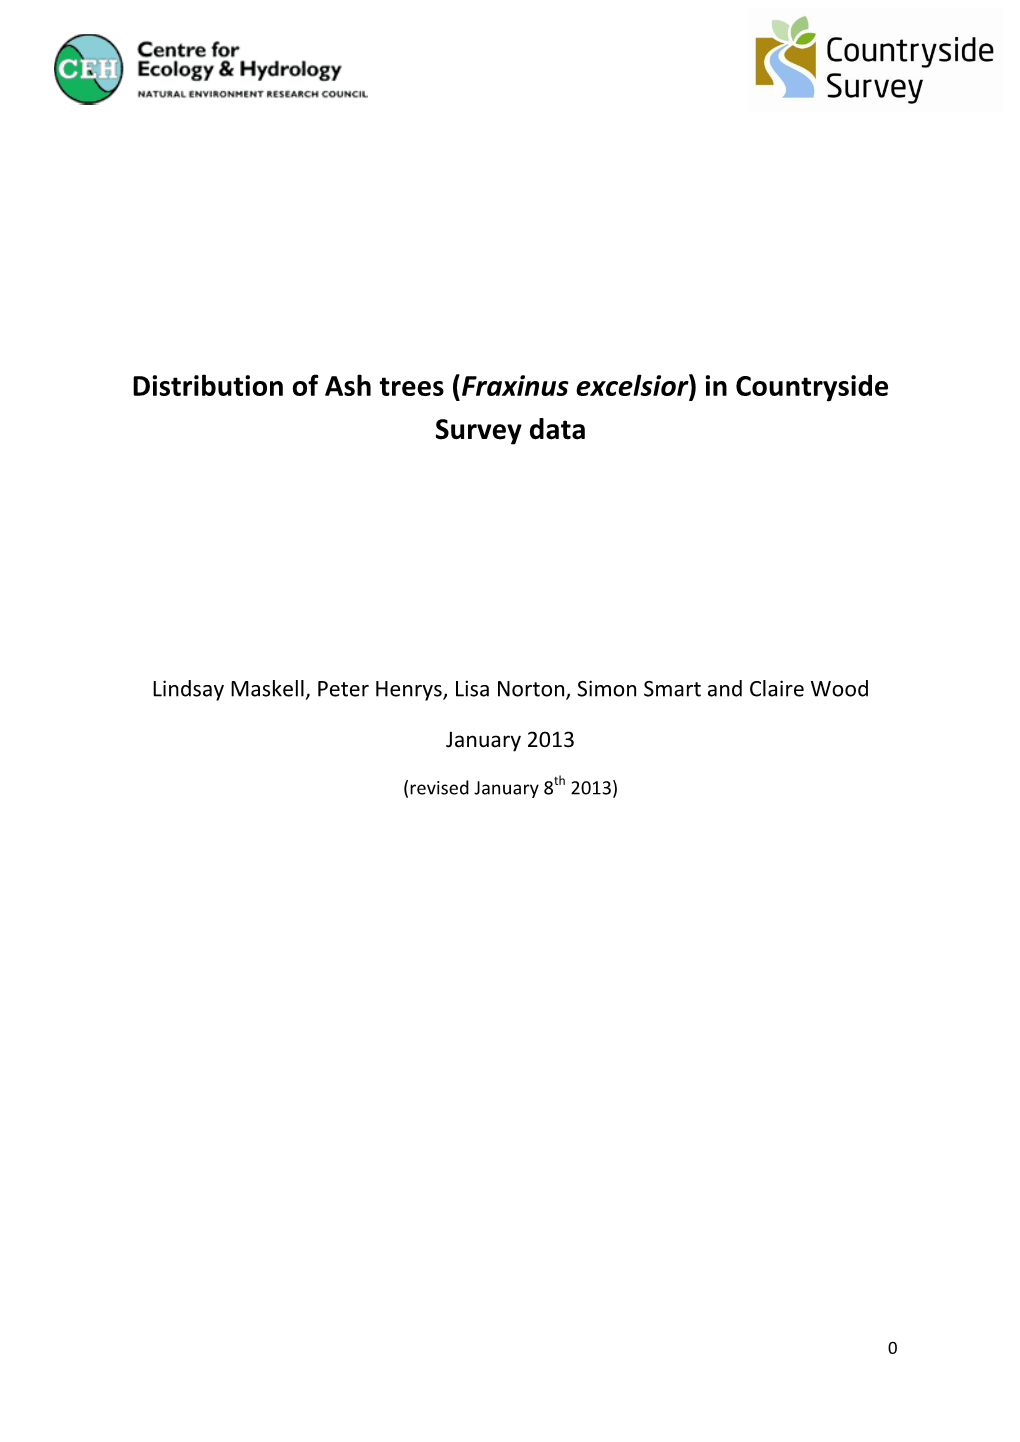 Distribution of Ash Trees (Fraxinus Excelsior) in Countryside Survey Data